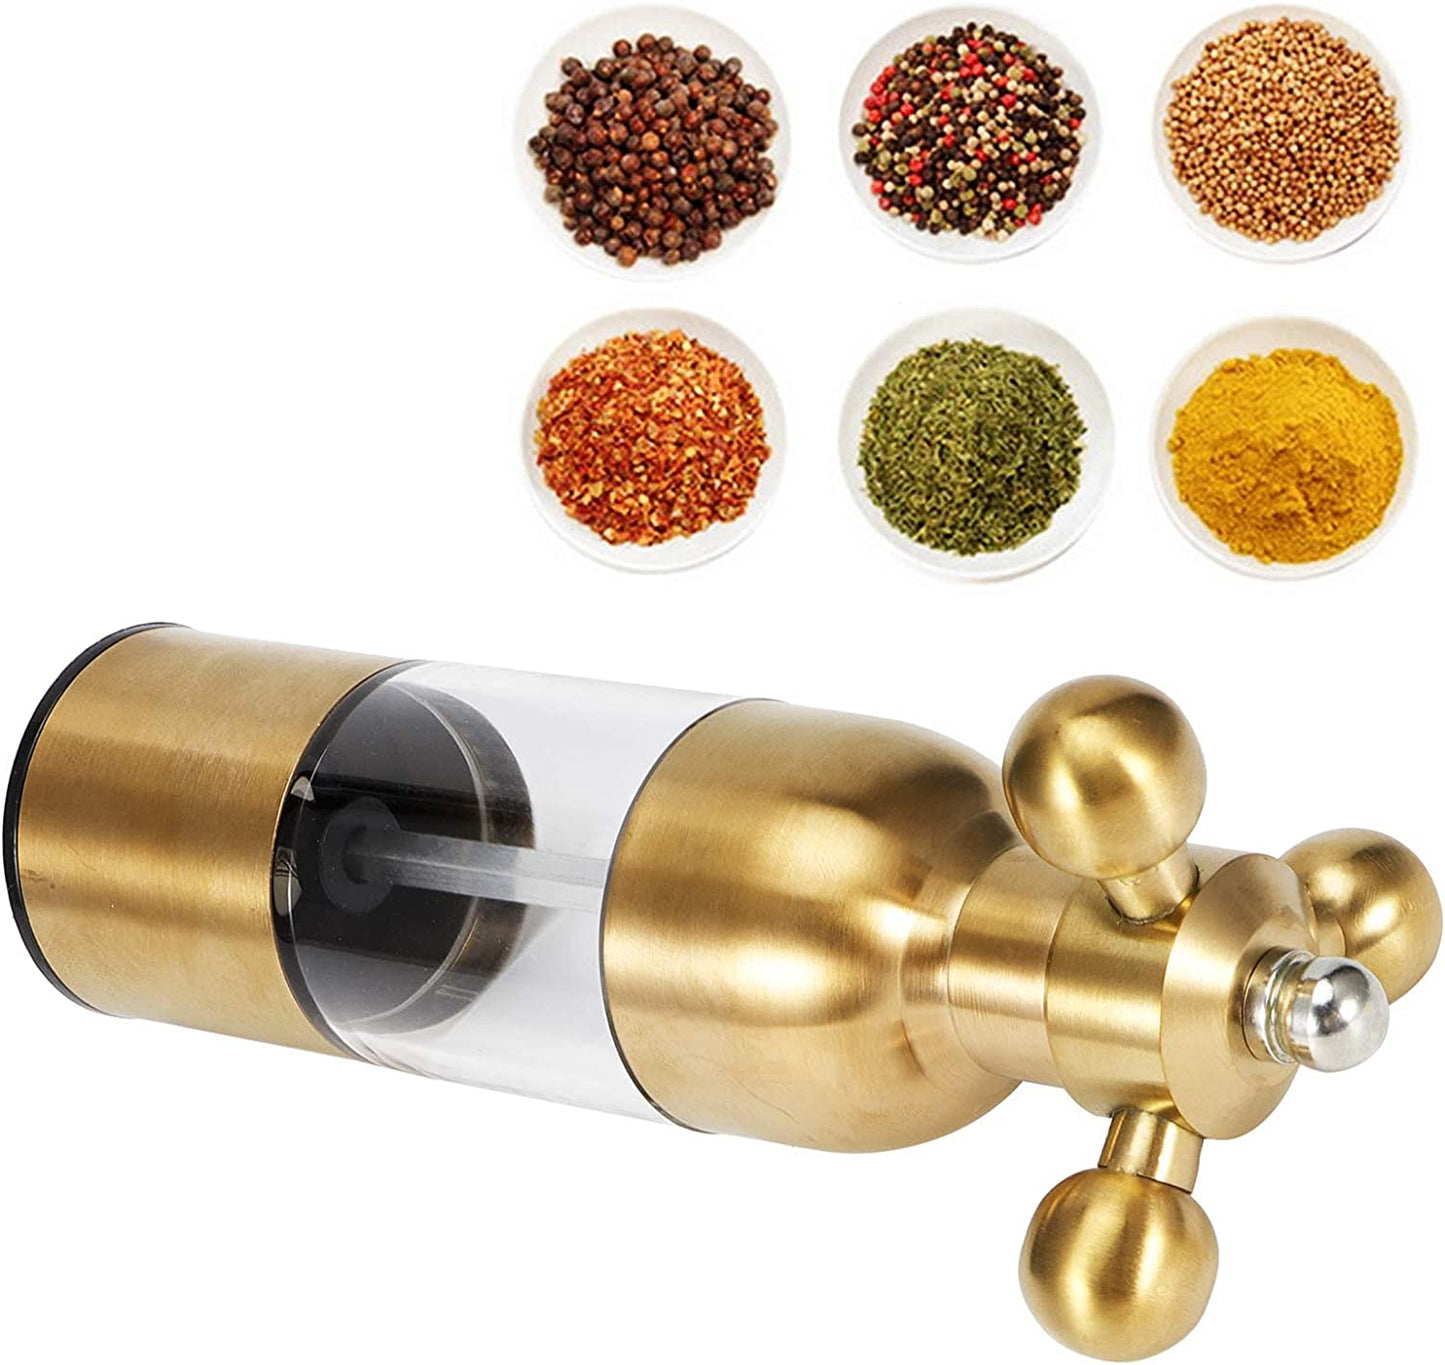 Stainless Steel Ceramic Core Grinder